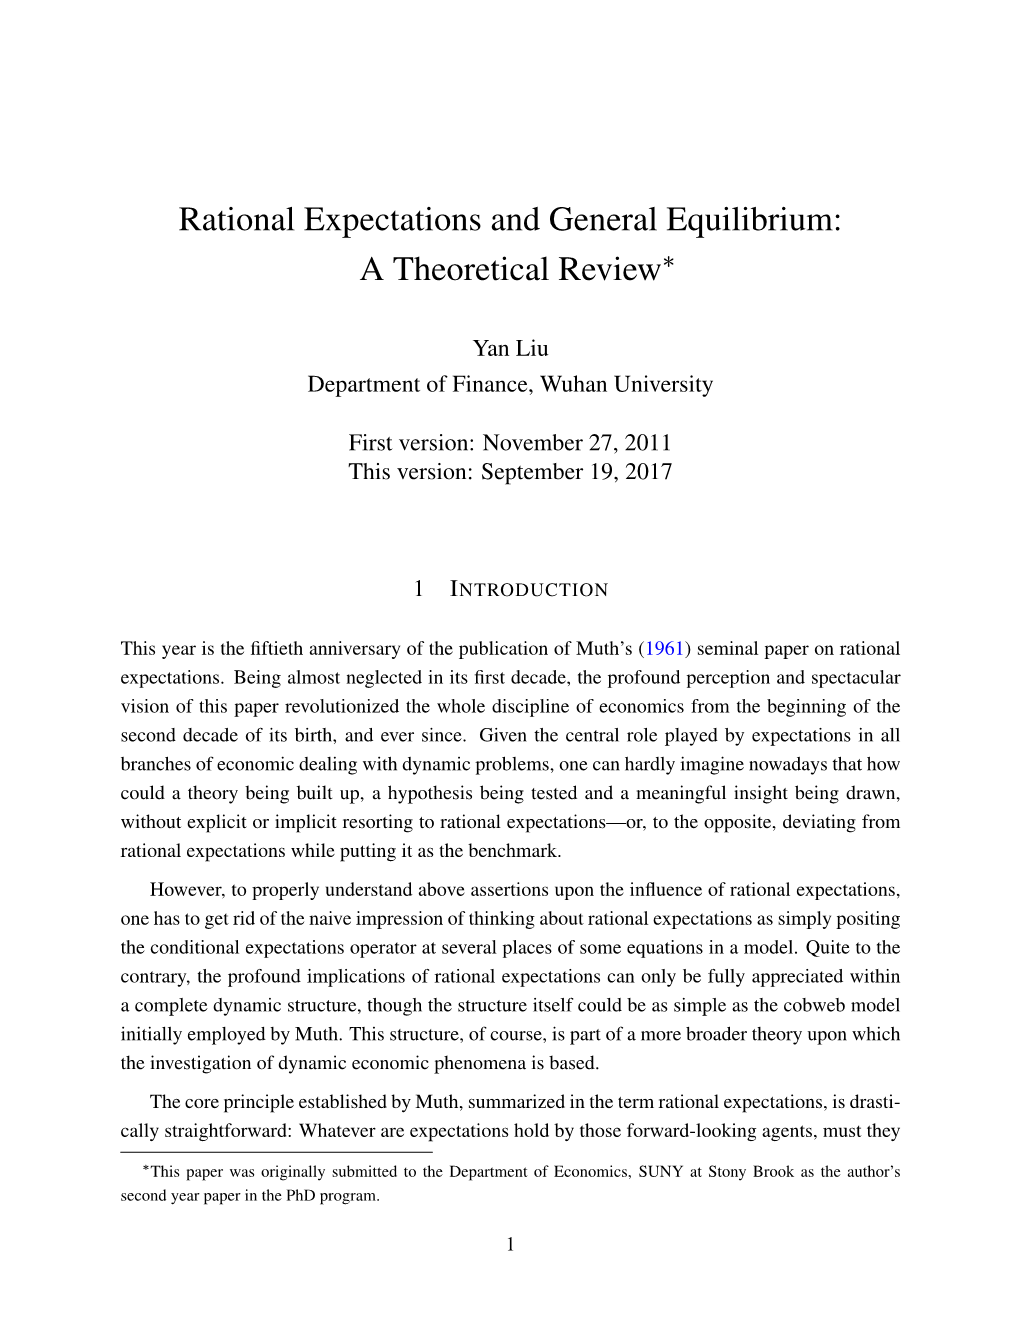 Rational Expectations and General Equilibrium: a Theoretical Review